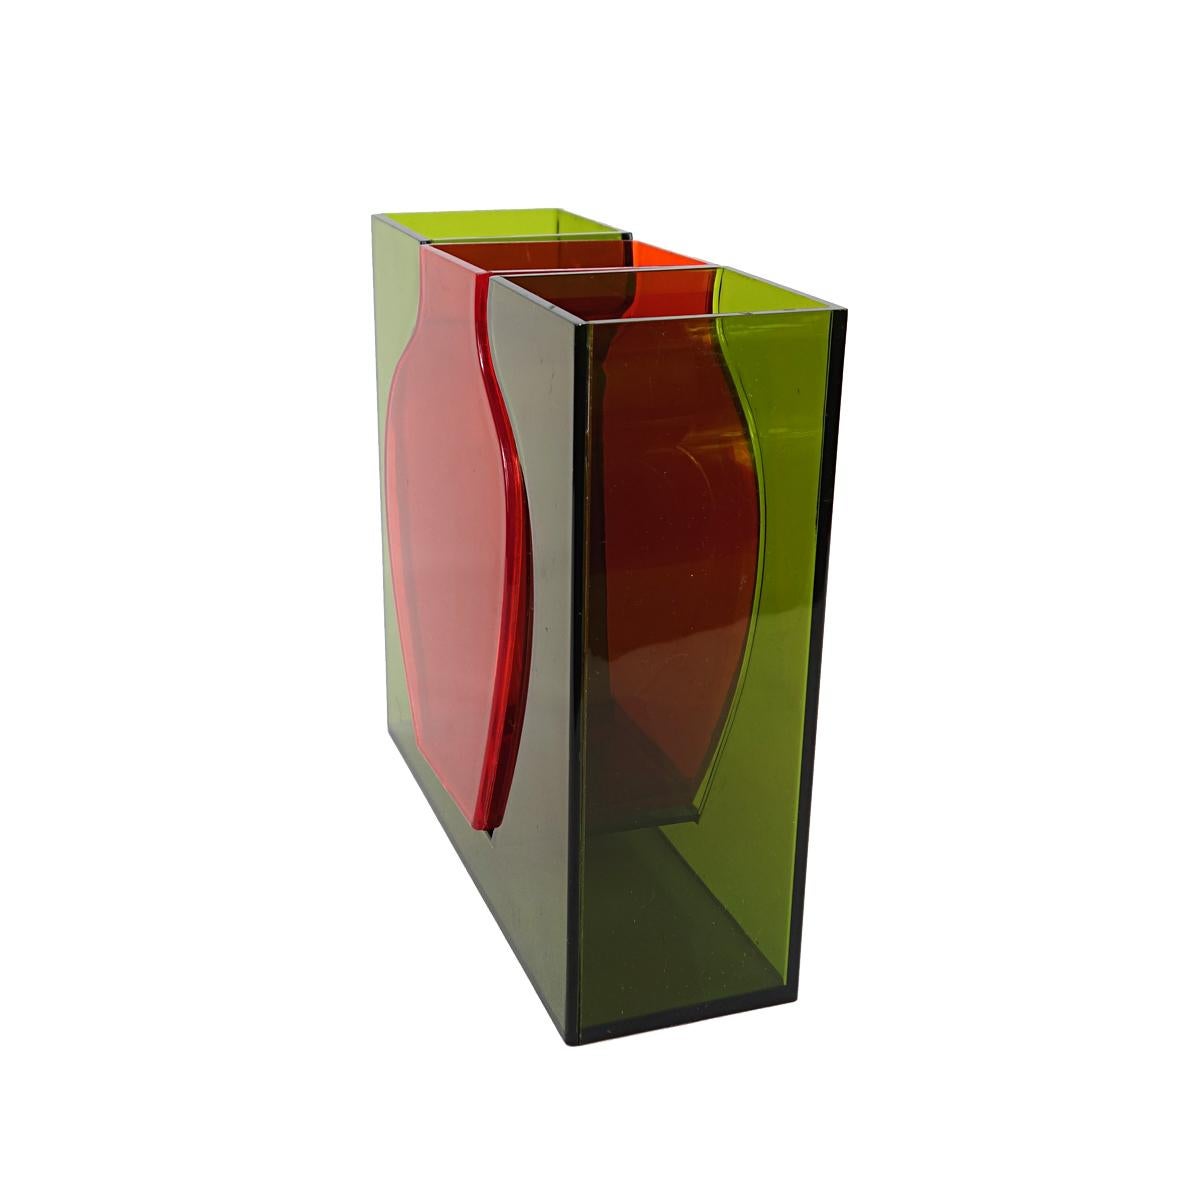 Late 20th Century 1990s Dutch Design Plexiglass Red Vase Within a Green Vase For Sale